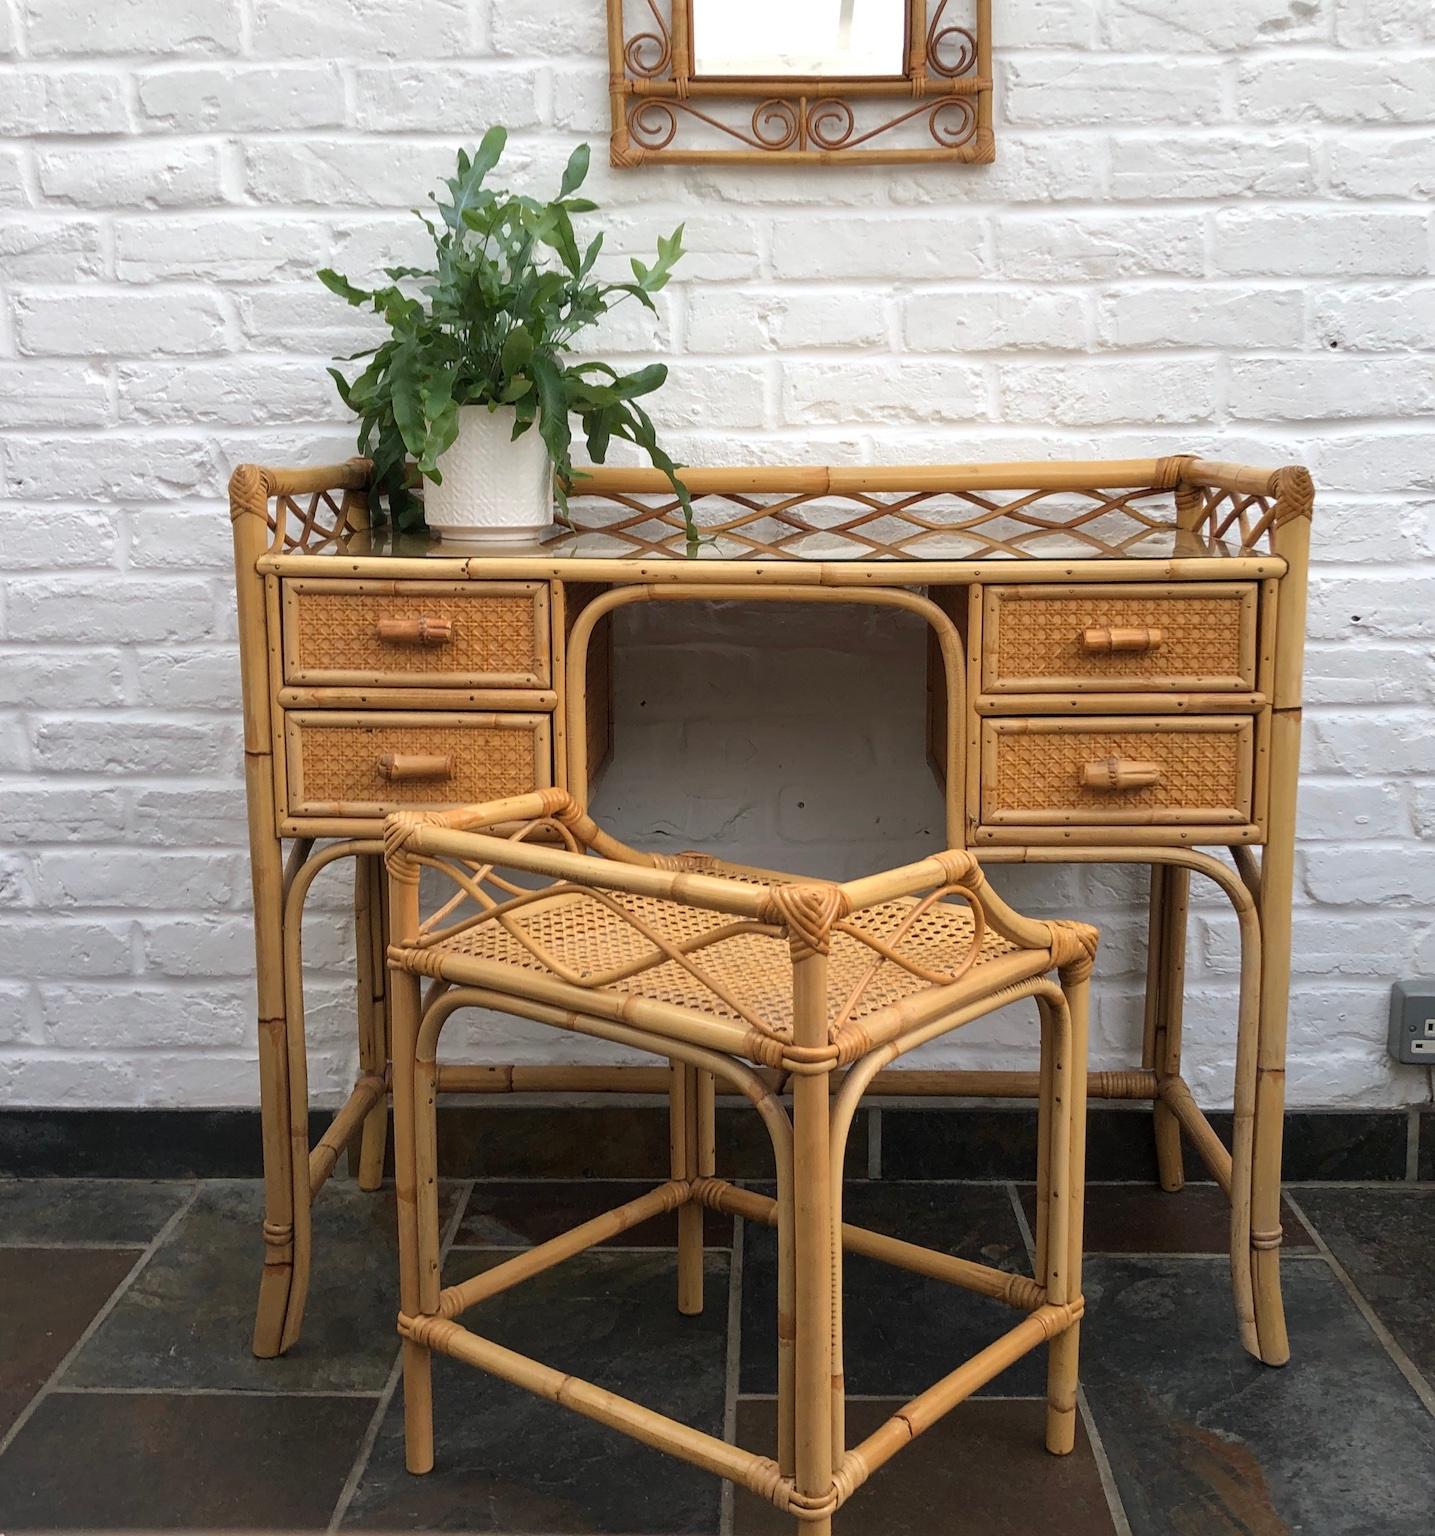 MidCentury Rattan cane dressing table / small desk, stool and mirror set, England, 1970s

This is a beautiful set consisting of a dressing table or small desk, matching stool and wall mirror. 
Made by English company ‘Angraves of Leicester’, who